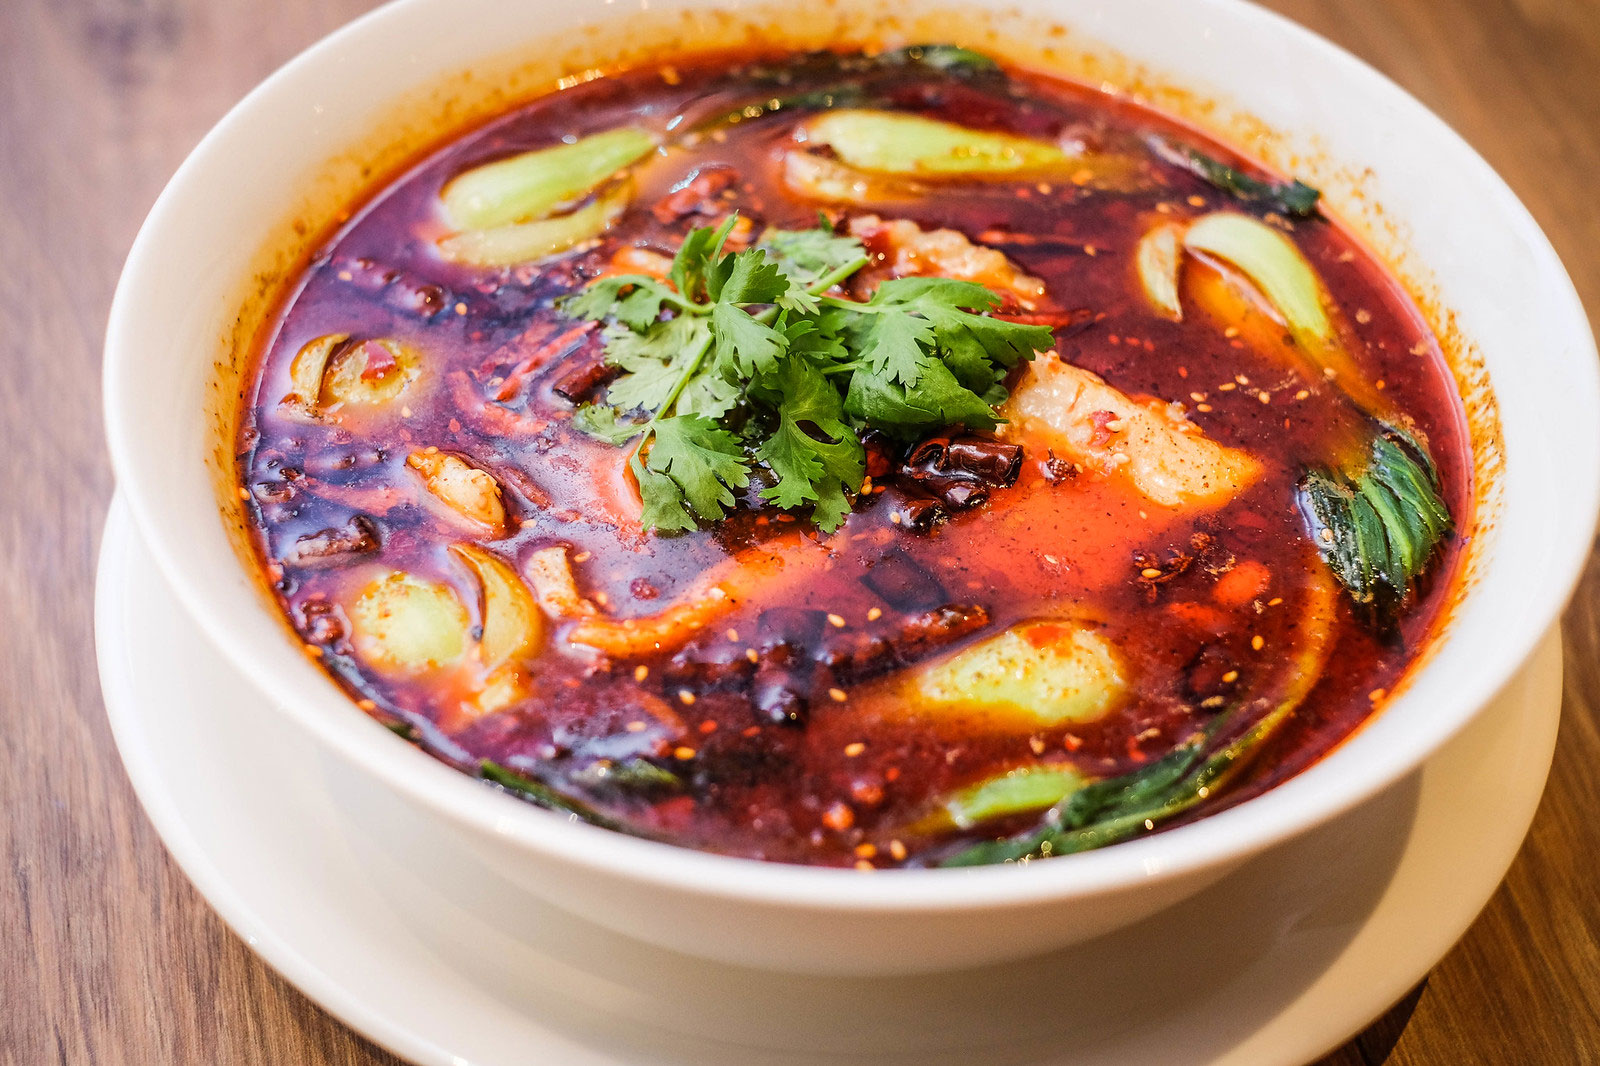 🌶 Only a Person Who Can Handle the Heat Will Have Eaten 13/25 of These Spicy Foods Mala soup